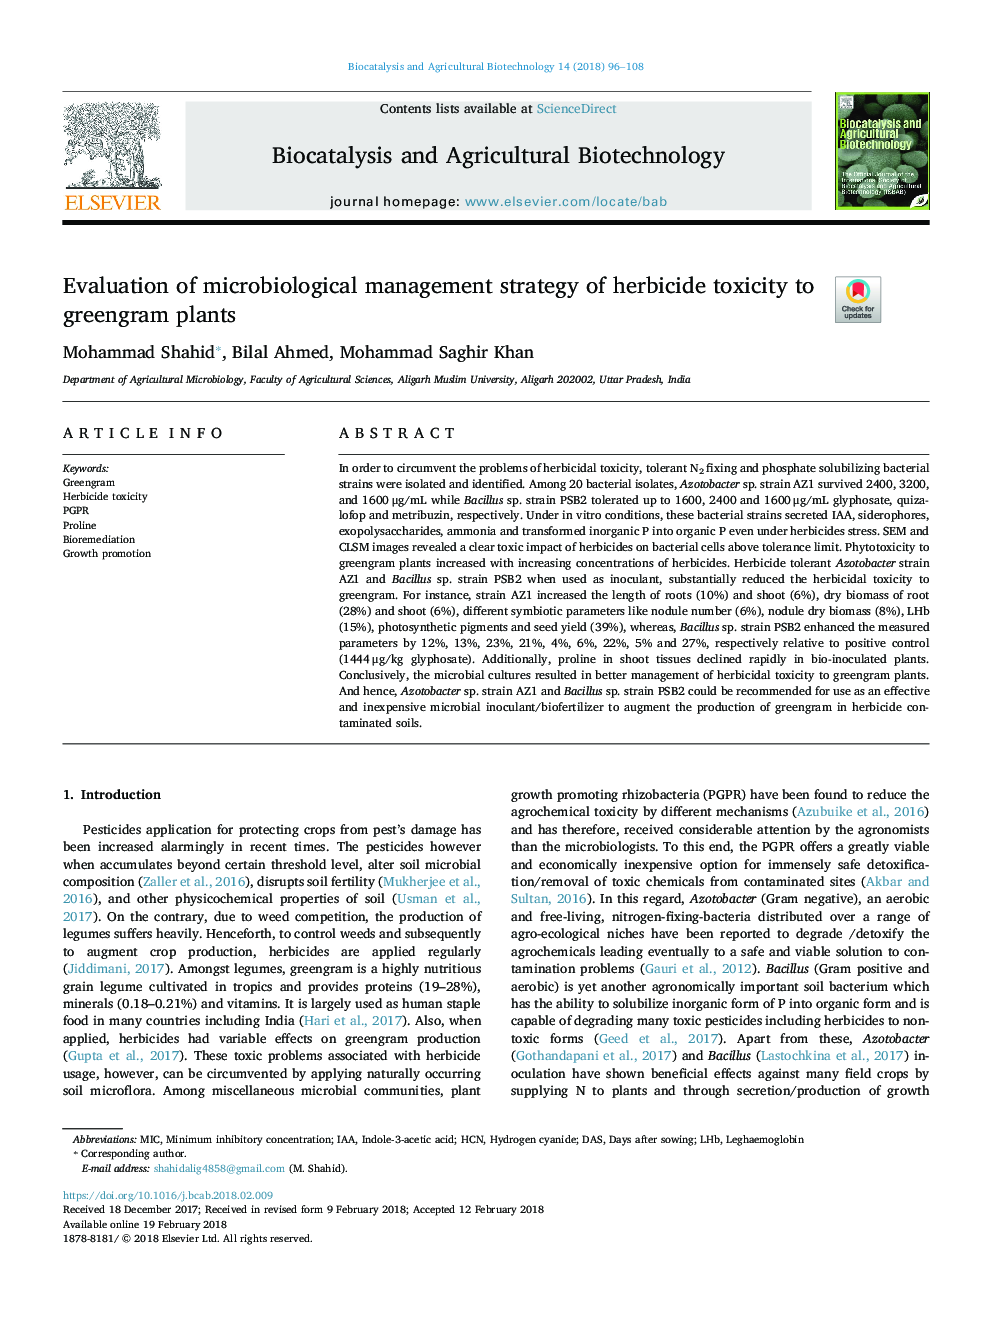 Evaluation of microbiological management strategy of herbicide toxicity to greengram plants